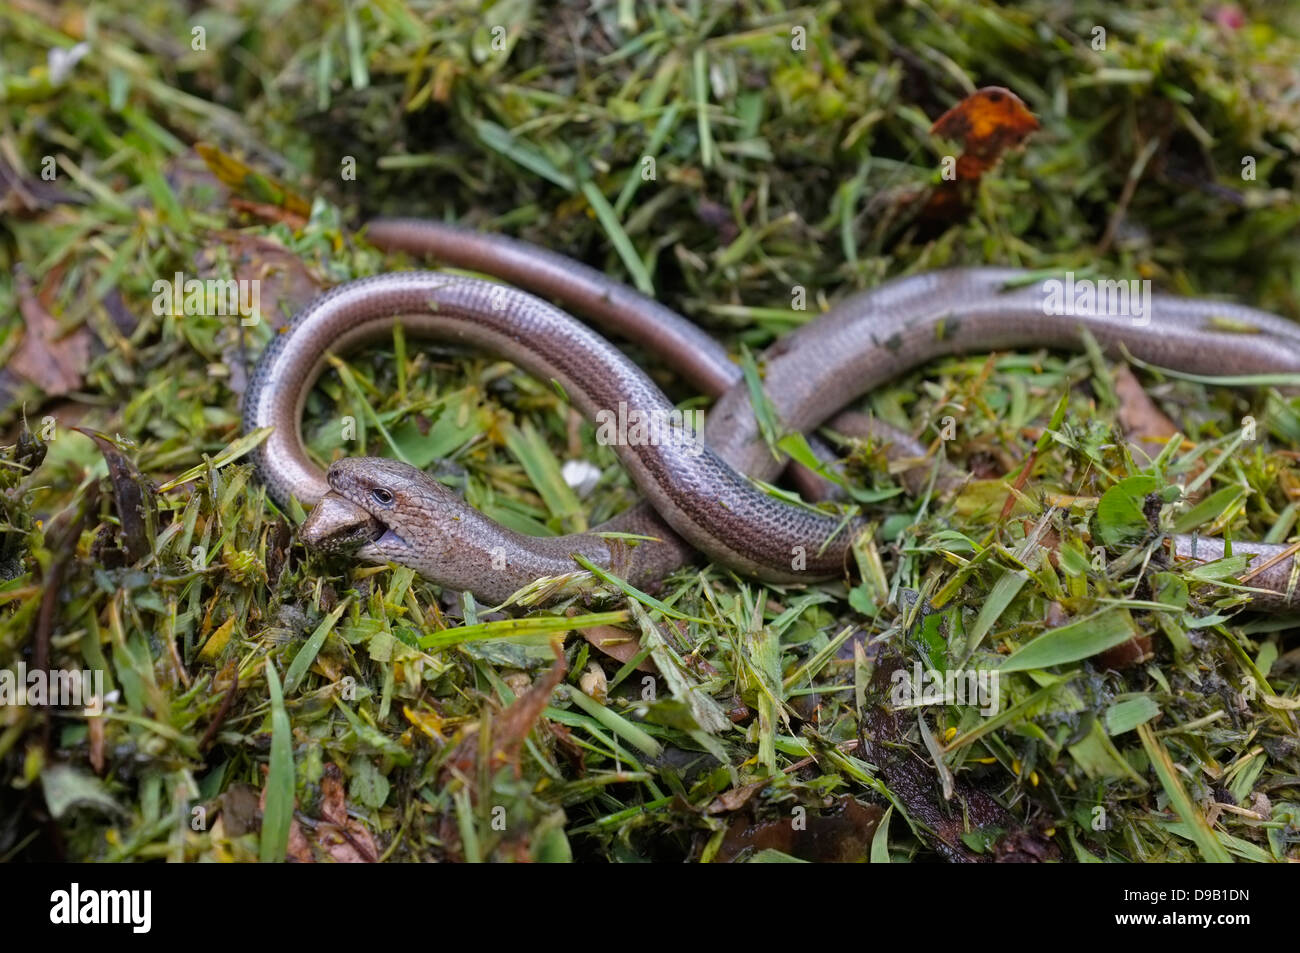 Slow worms mating, male holding female's head Stock Photo